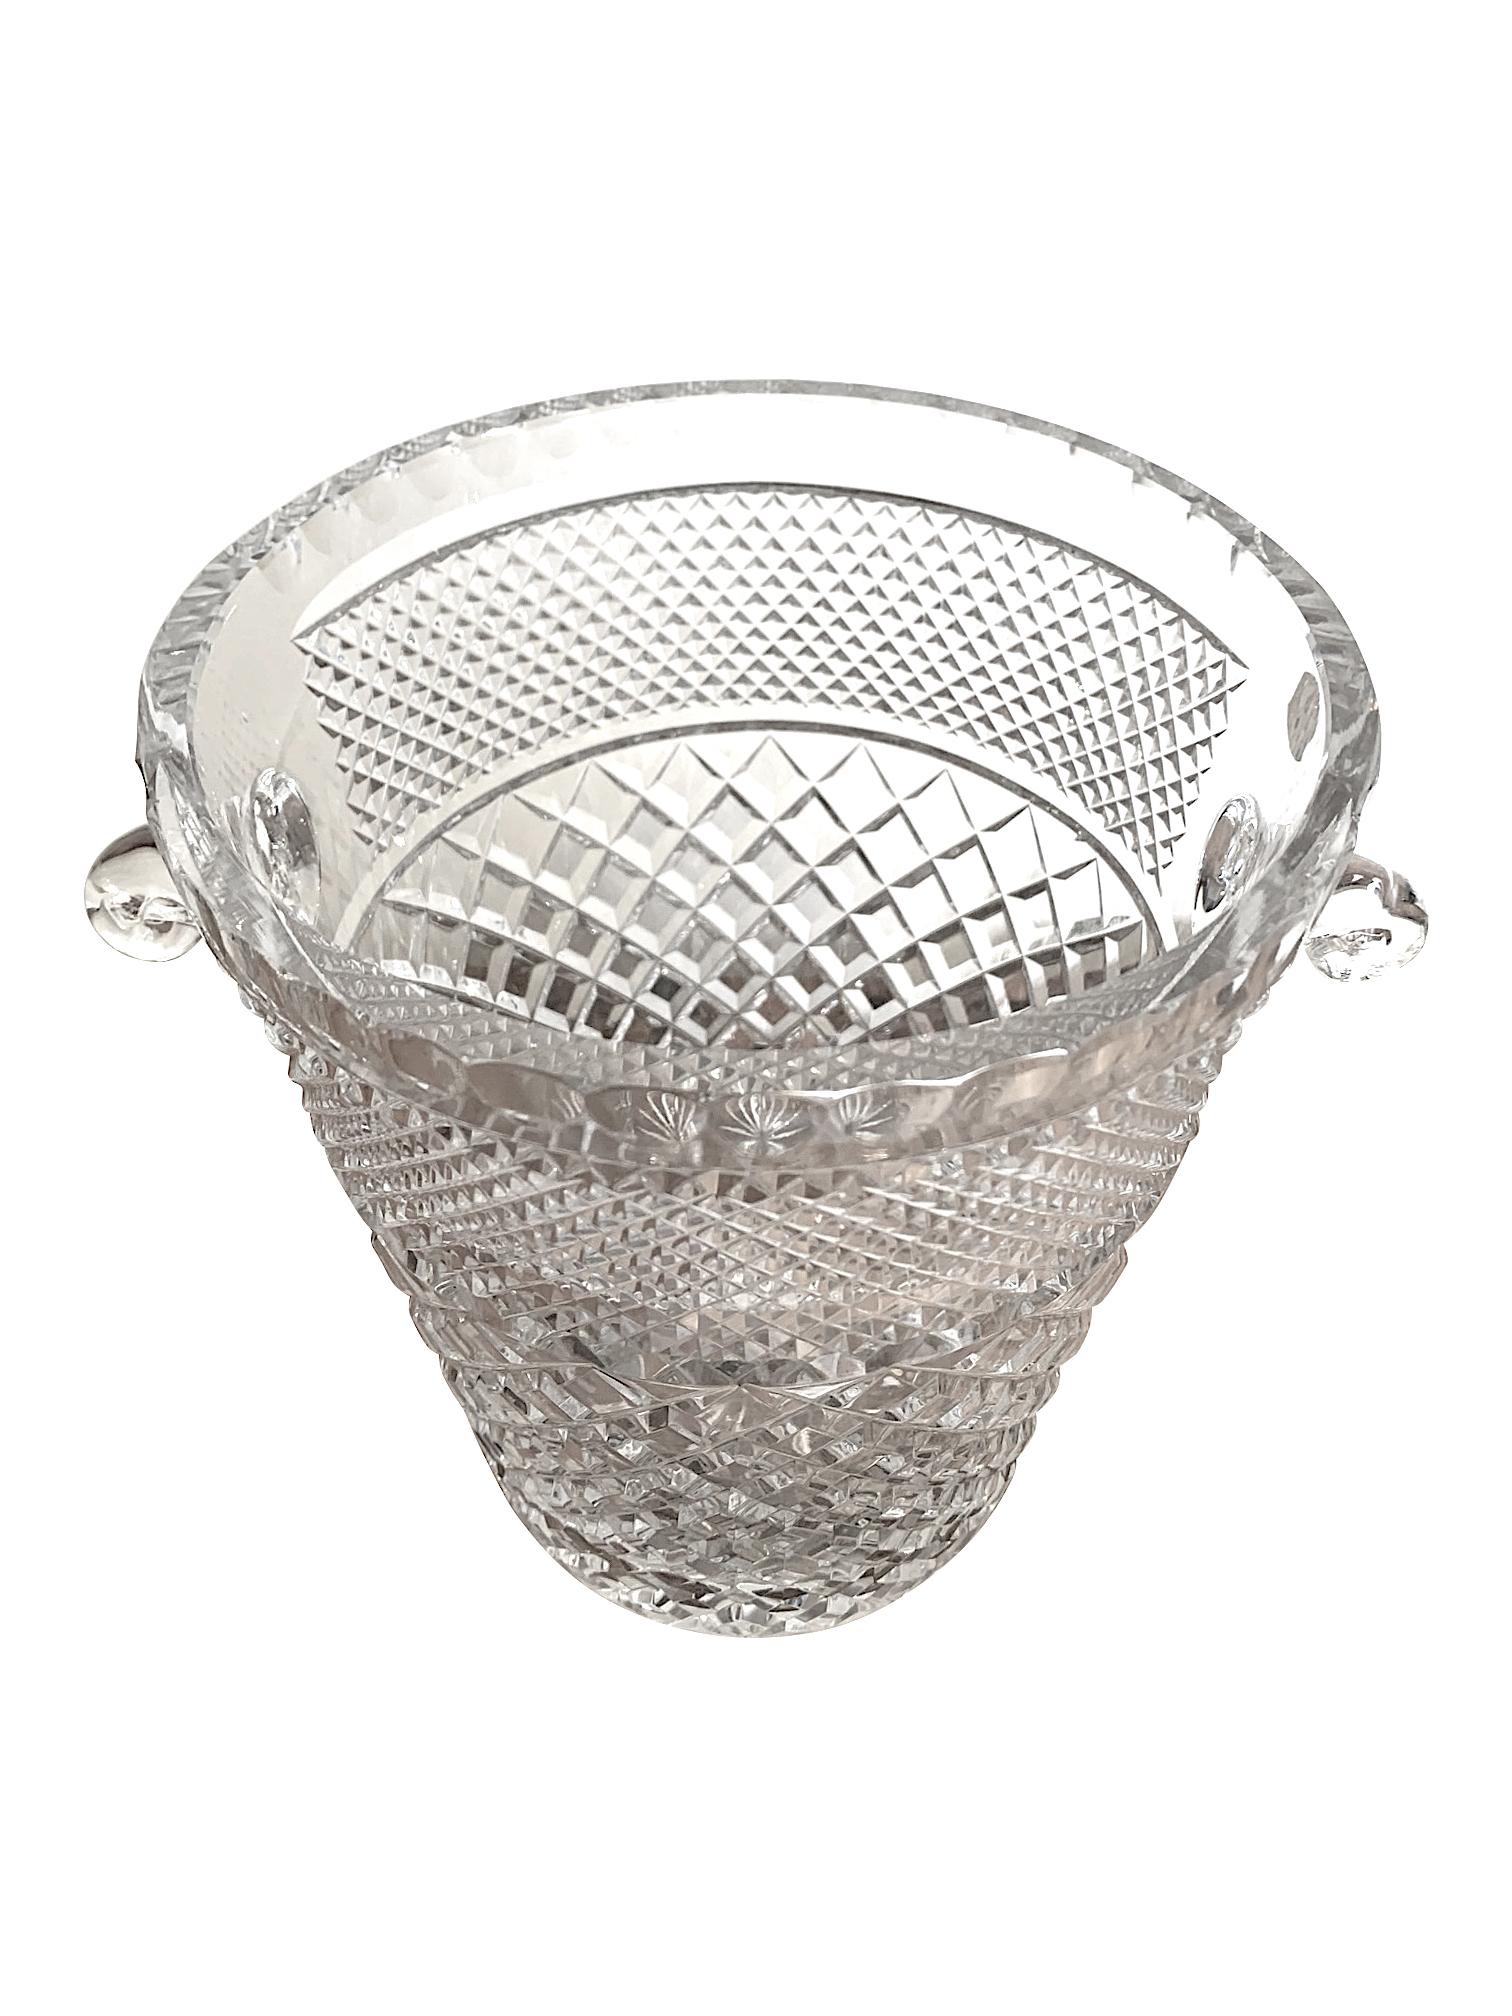 A Val Saint Lambert cut crystal champagne bucket with glass handles, still with orignal 